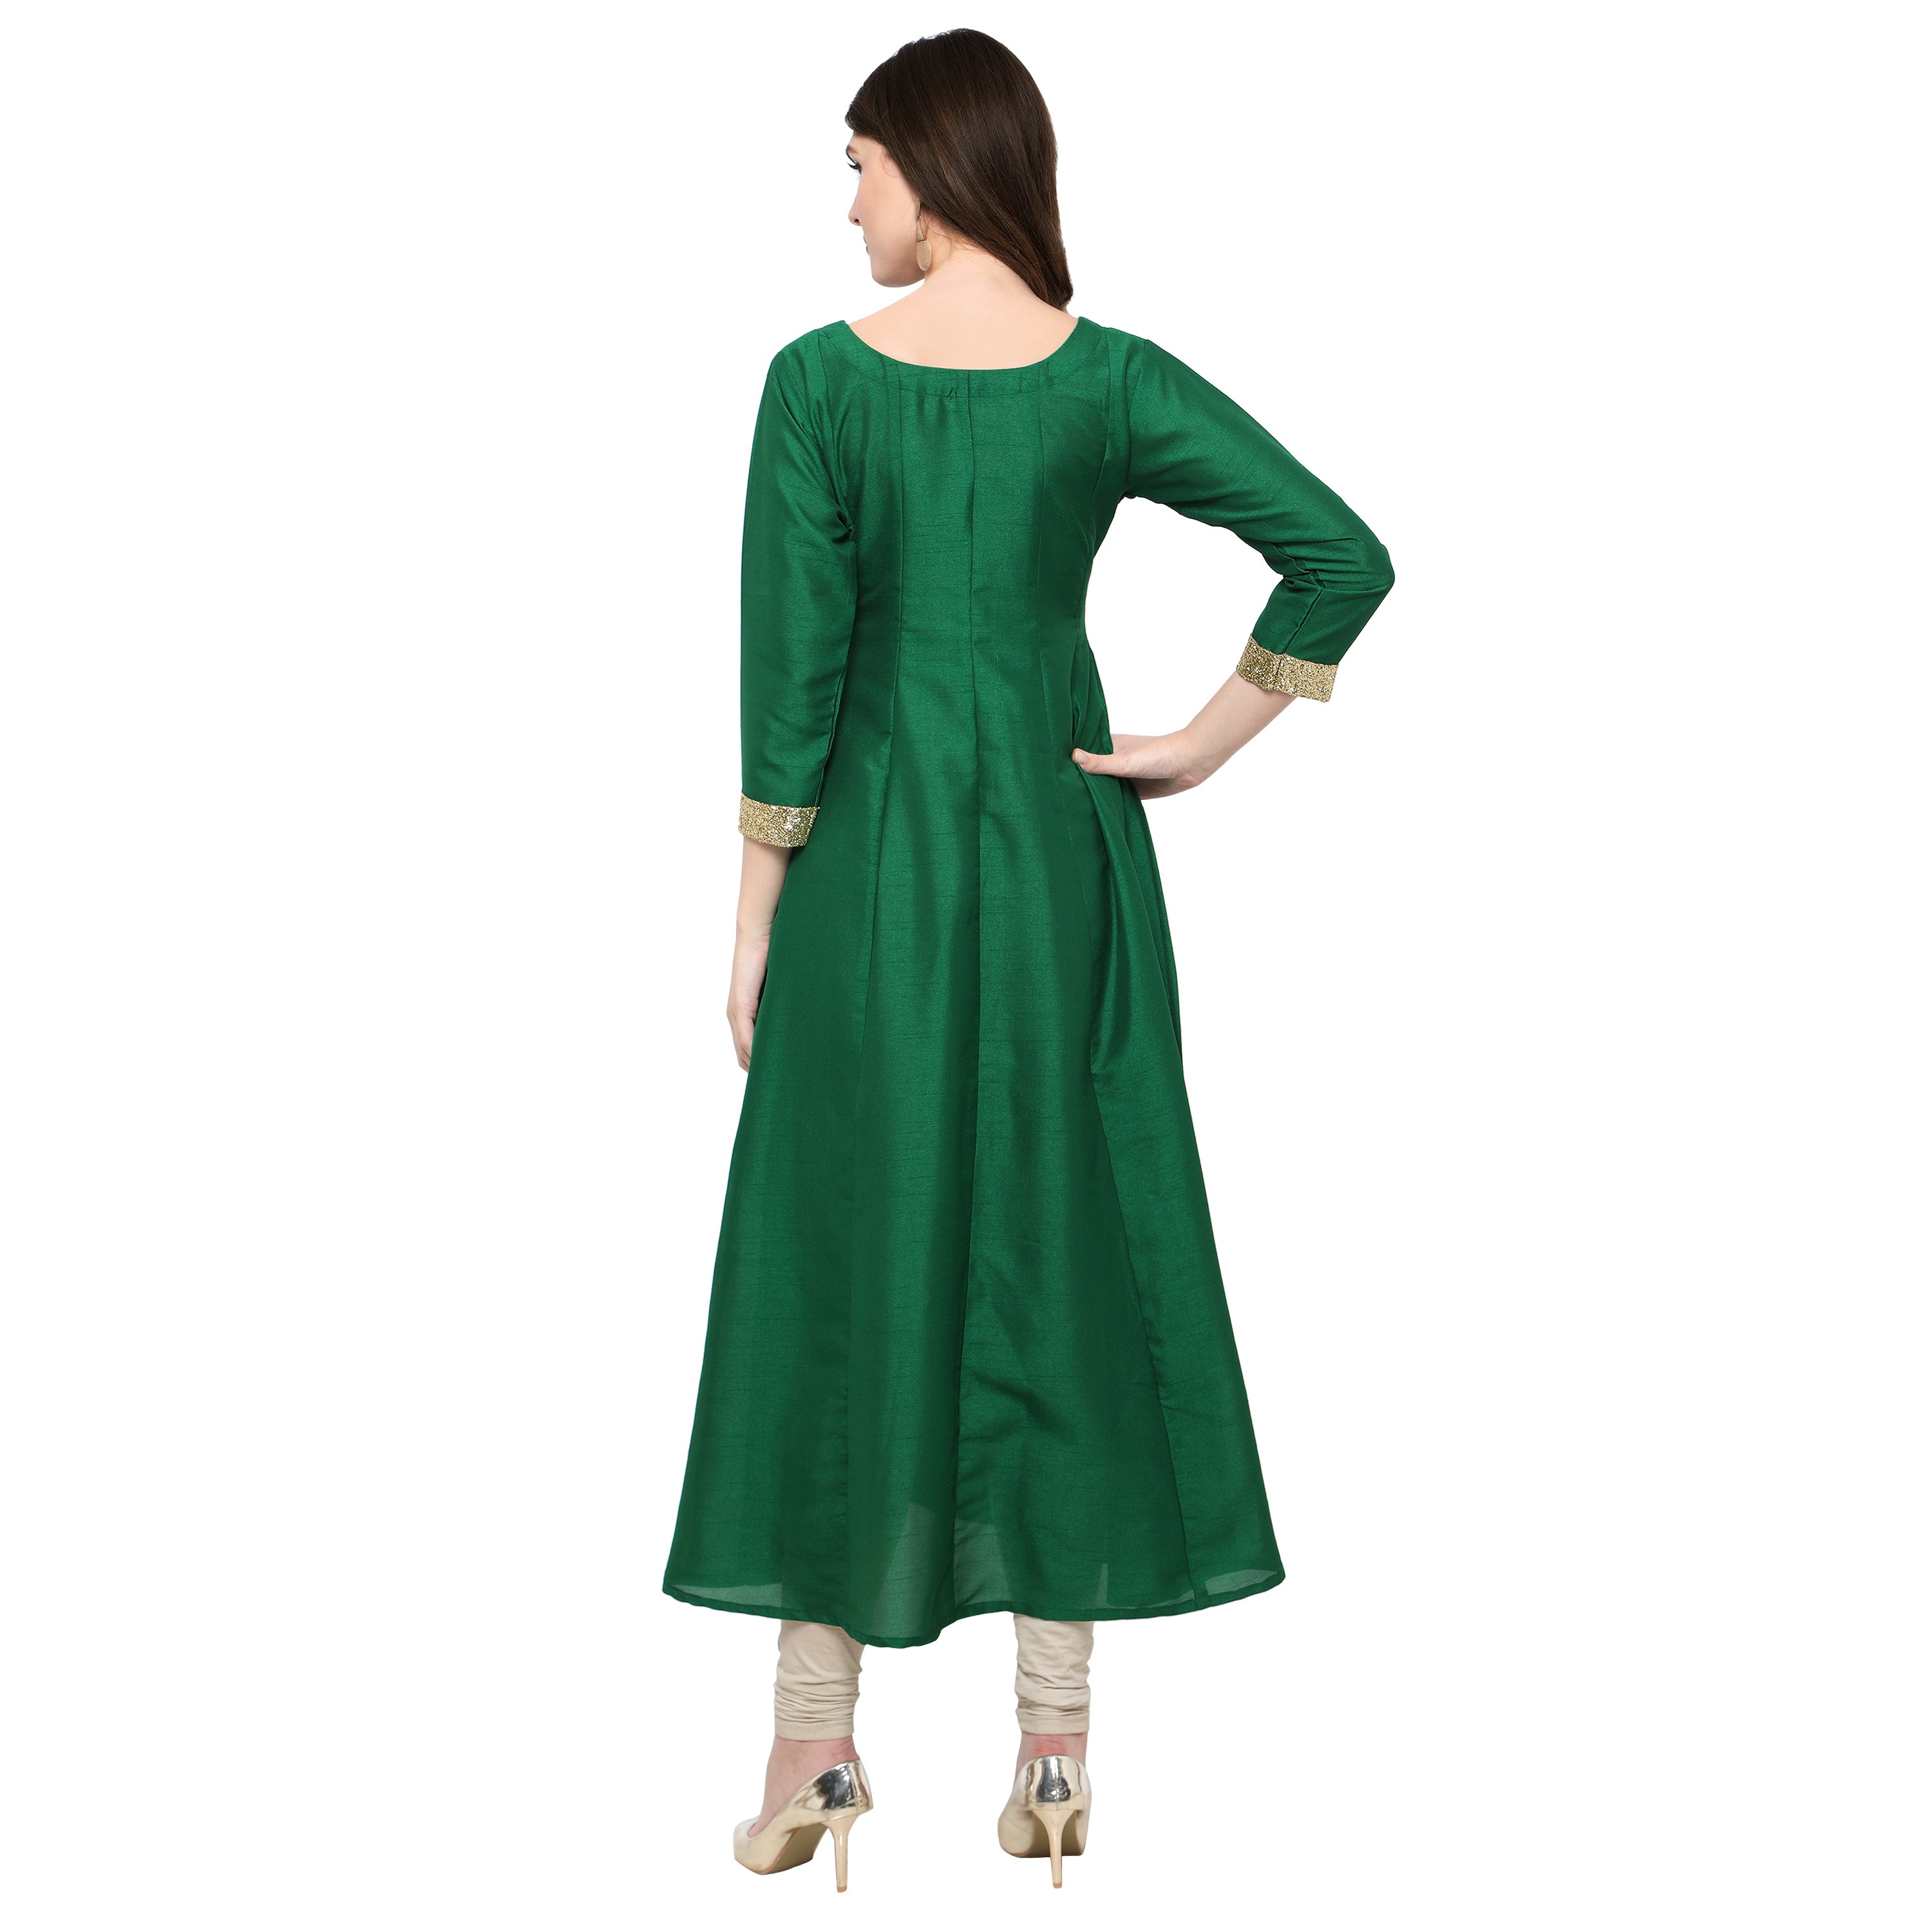 Women's Women's Green And Gold Anarkali Kurta Only For Festive And Party Wear - Ahalyaa